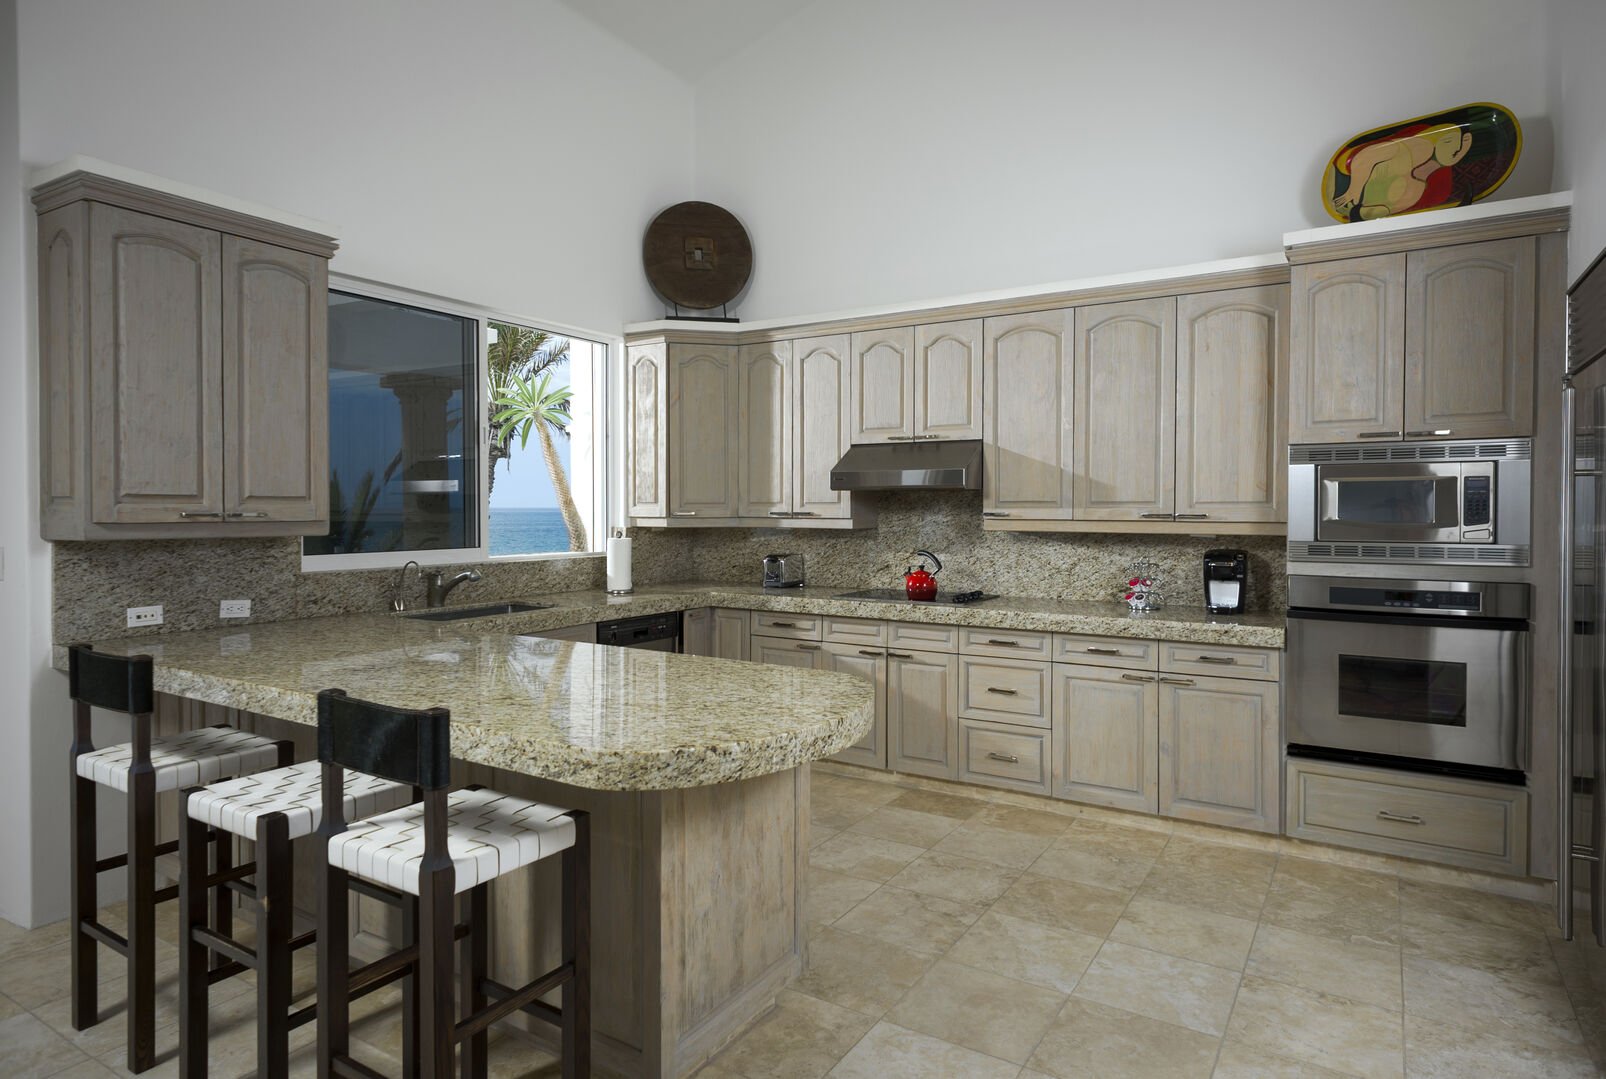 Kitchen with a built-in oven and a kitchen island